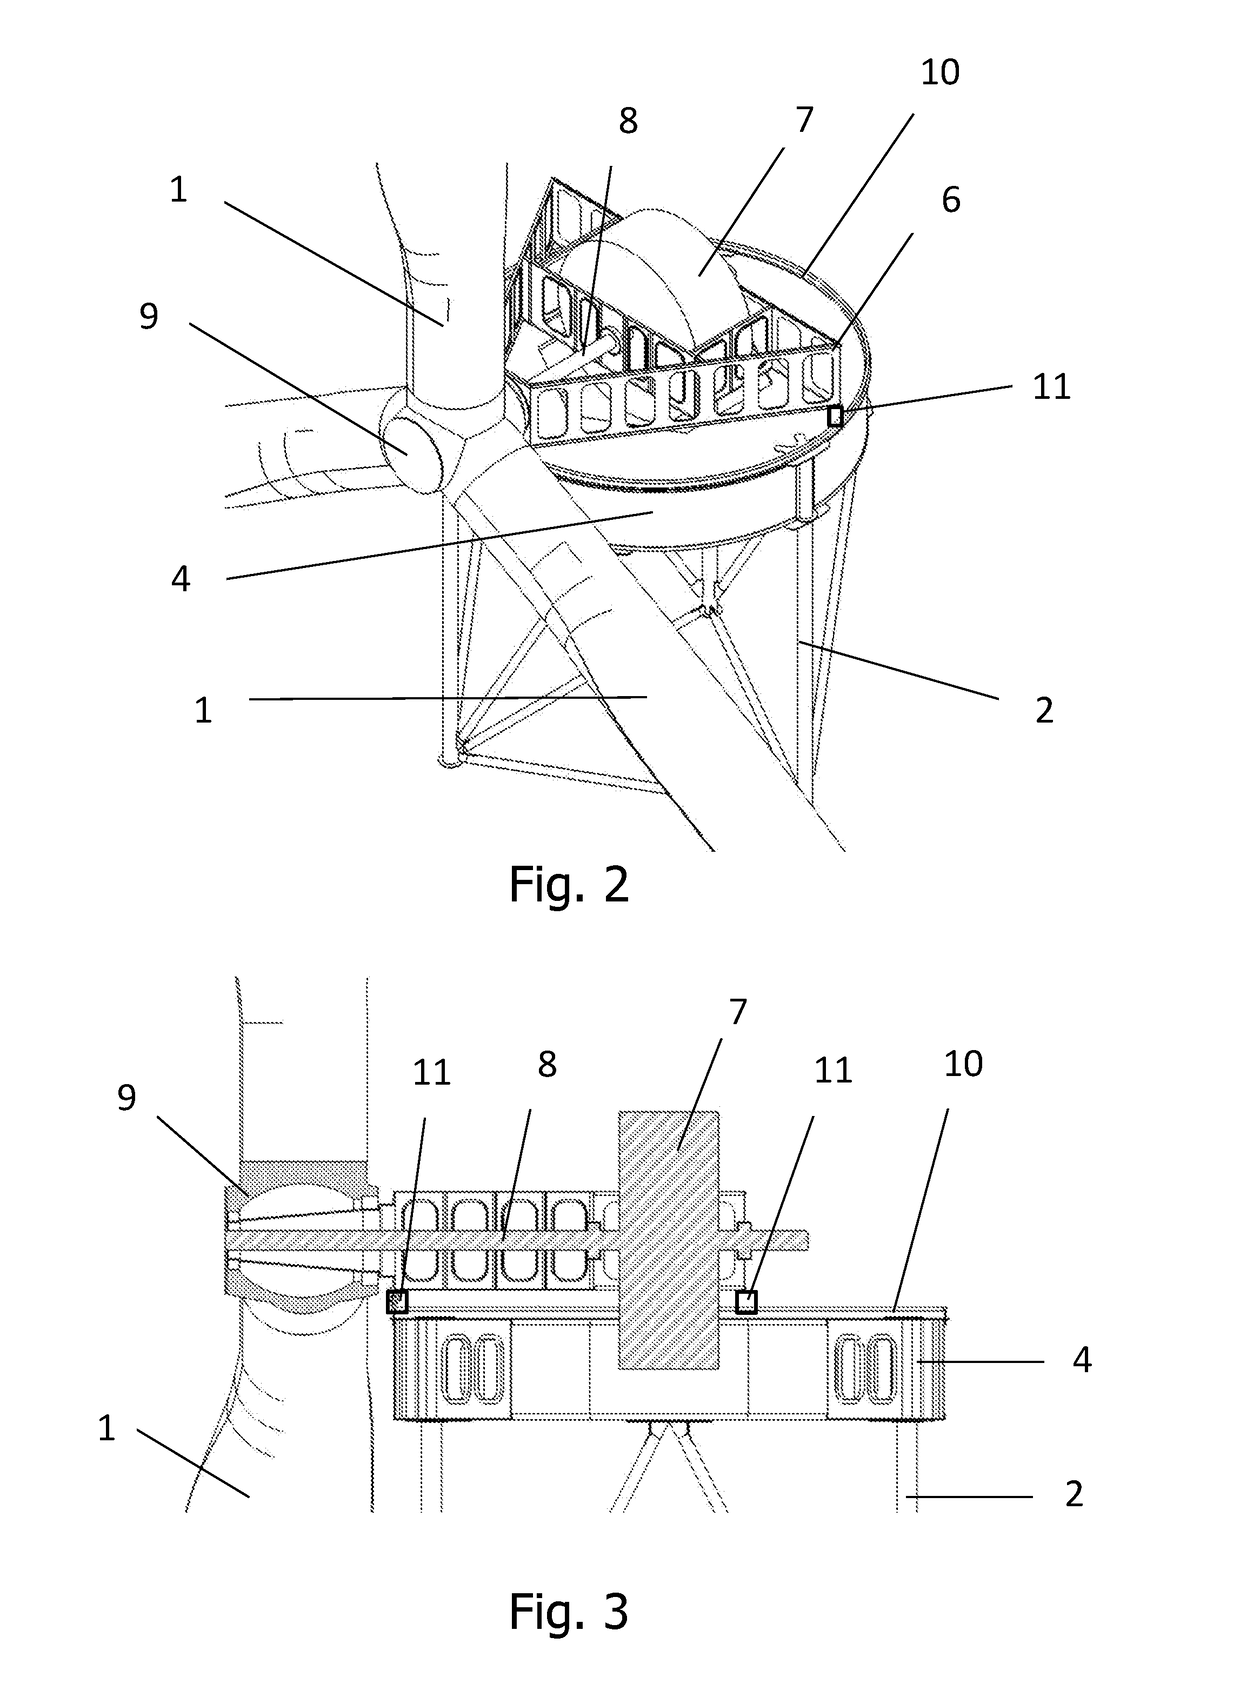 Apparatus for Changing the Angle of Inclination in Wind Turbines